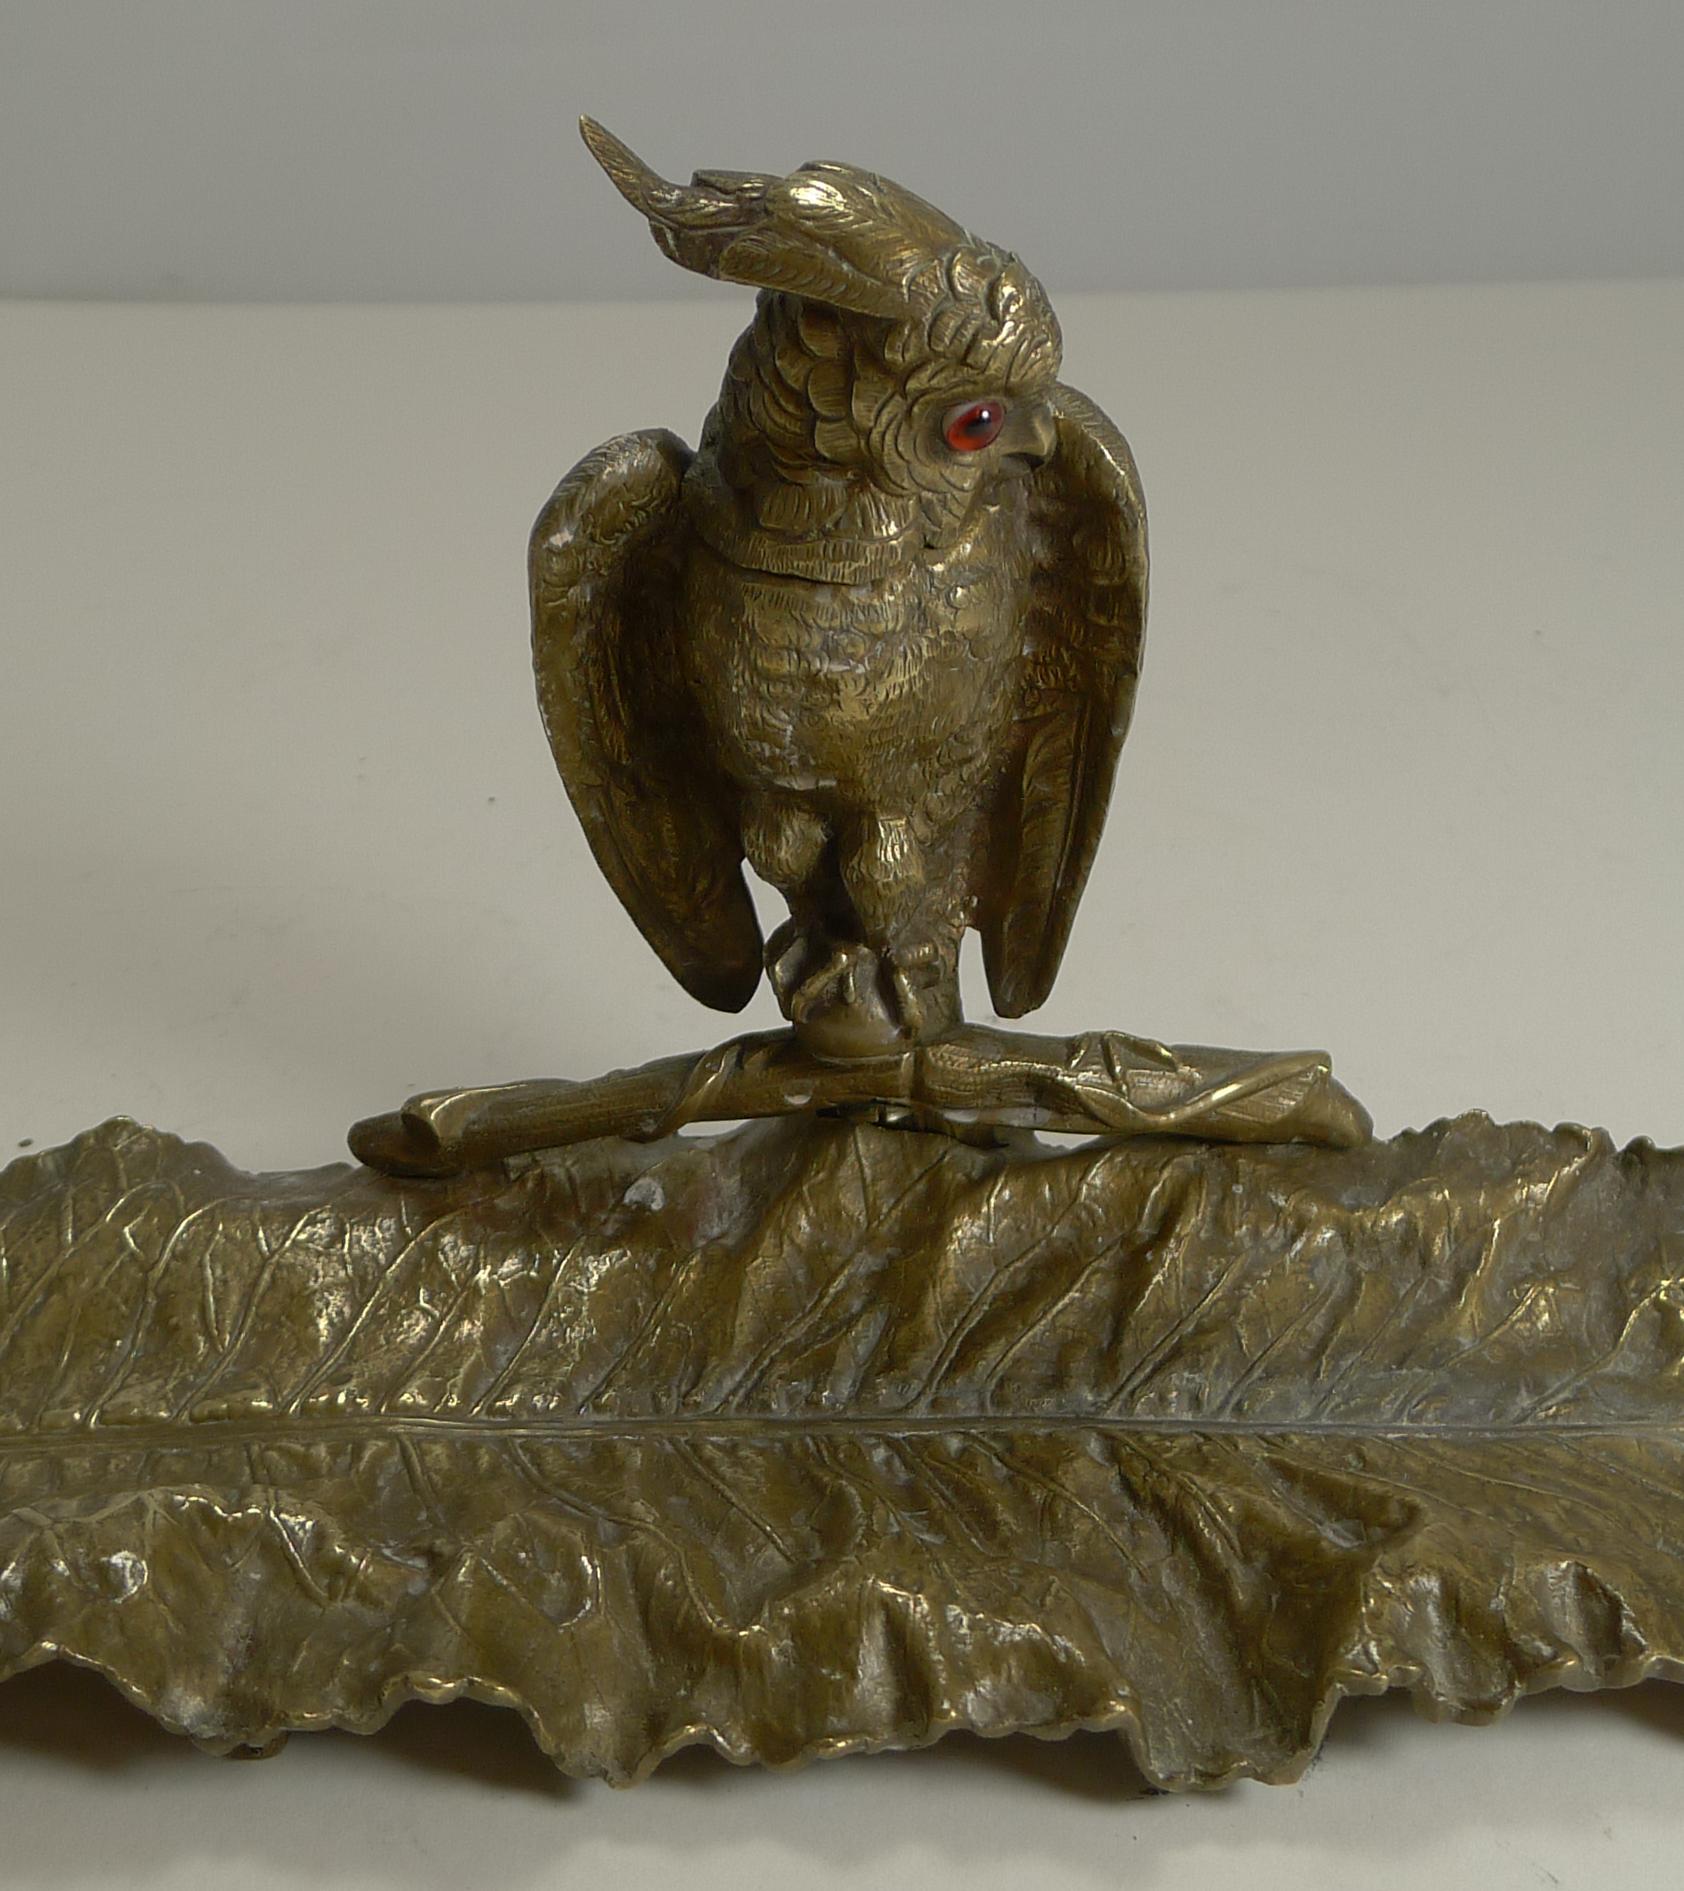 A wonderful and impressive figural inkwell made from solid cast English brass, beautifully executed with a fabulous patina.

Standing on little cast feet, the large leaf is of course a pen tray to rest one's pen. The novelty inkwell is cast in the